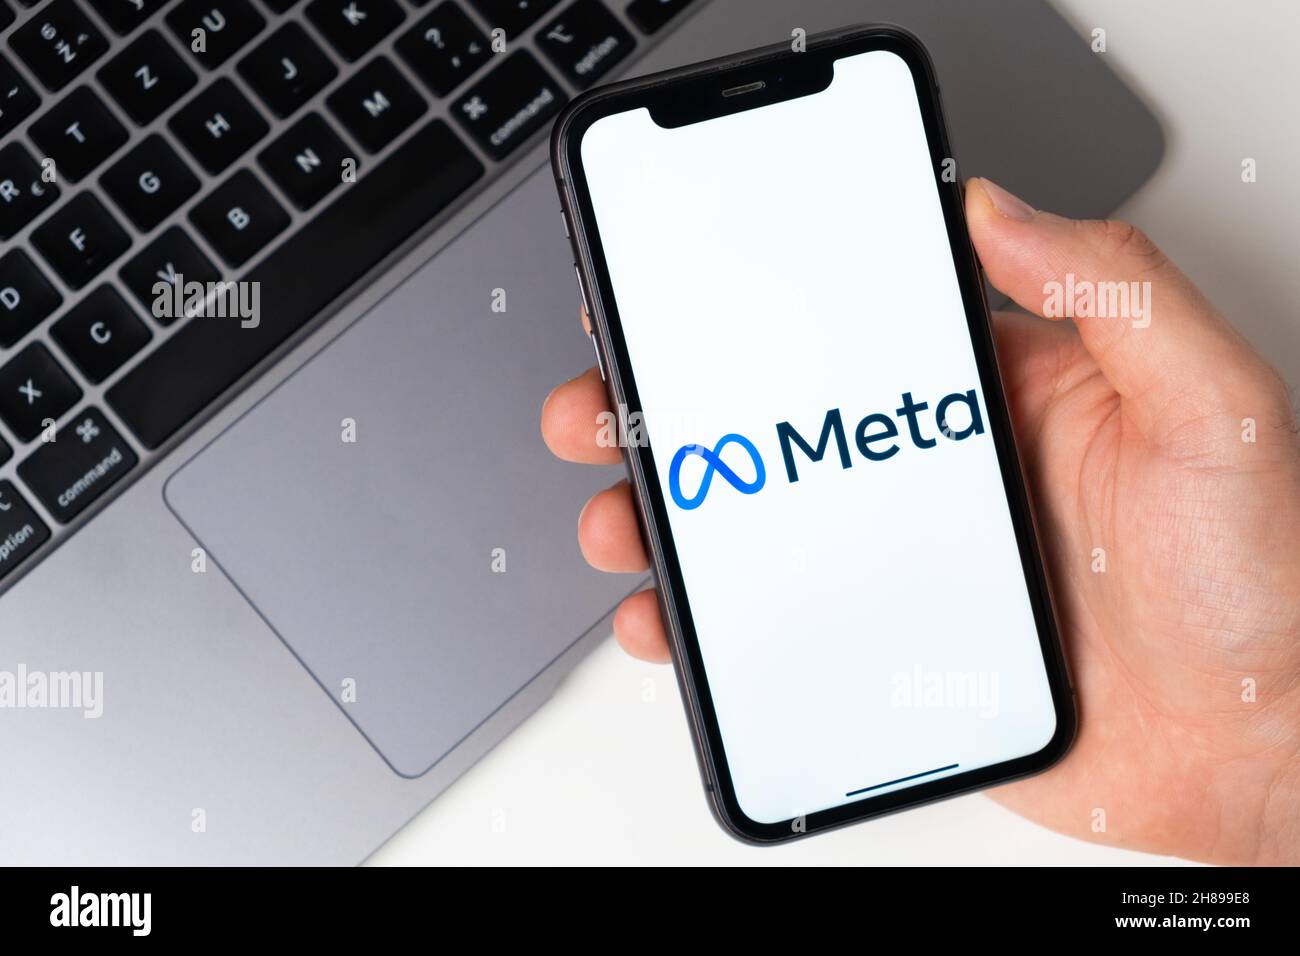 Meta the application is open in the smartphone. The man is holding a mobile phone in his hand, the company application is open on the screen. Secure online shopping. November 2021, San Francisco, USA Stock Photo